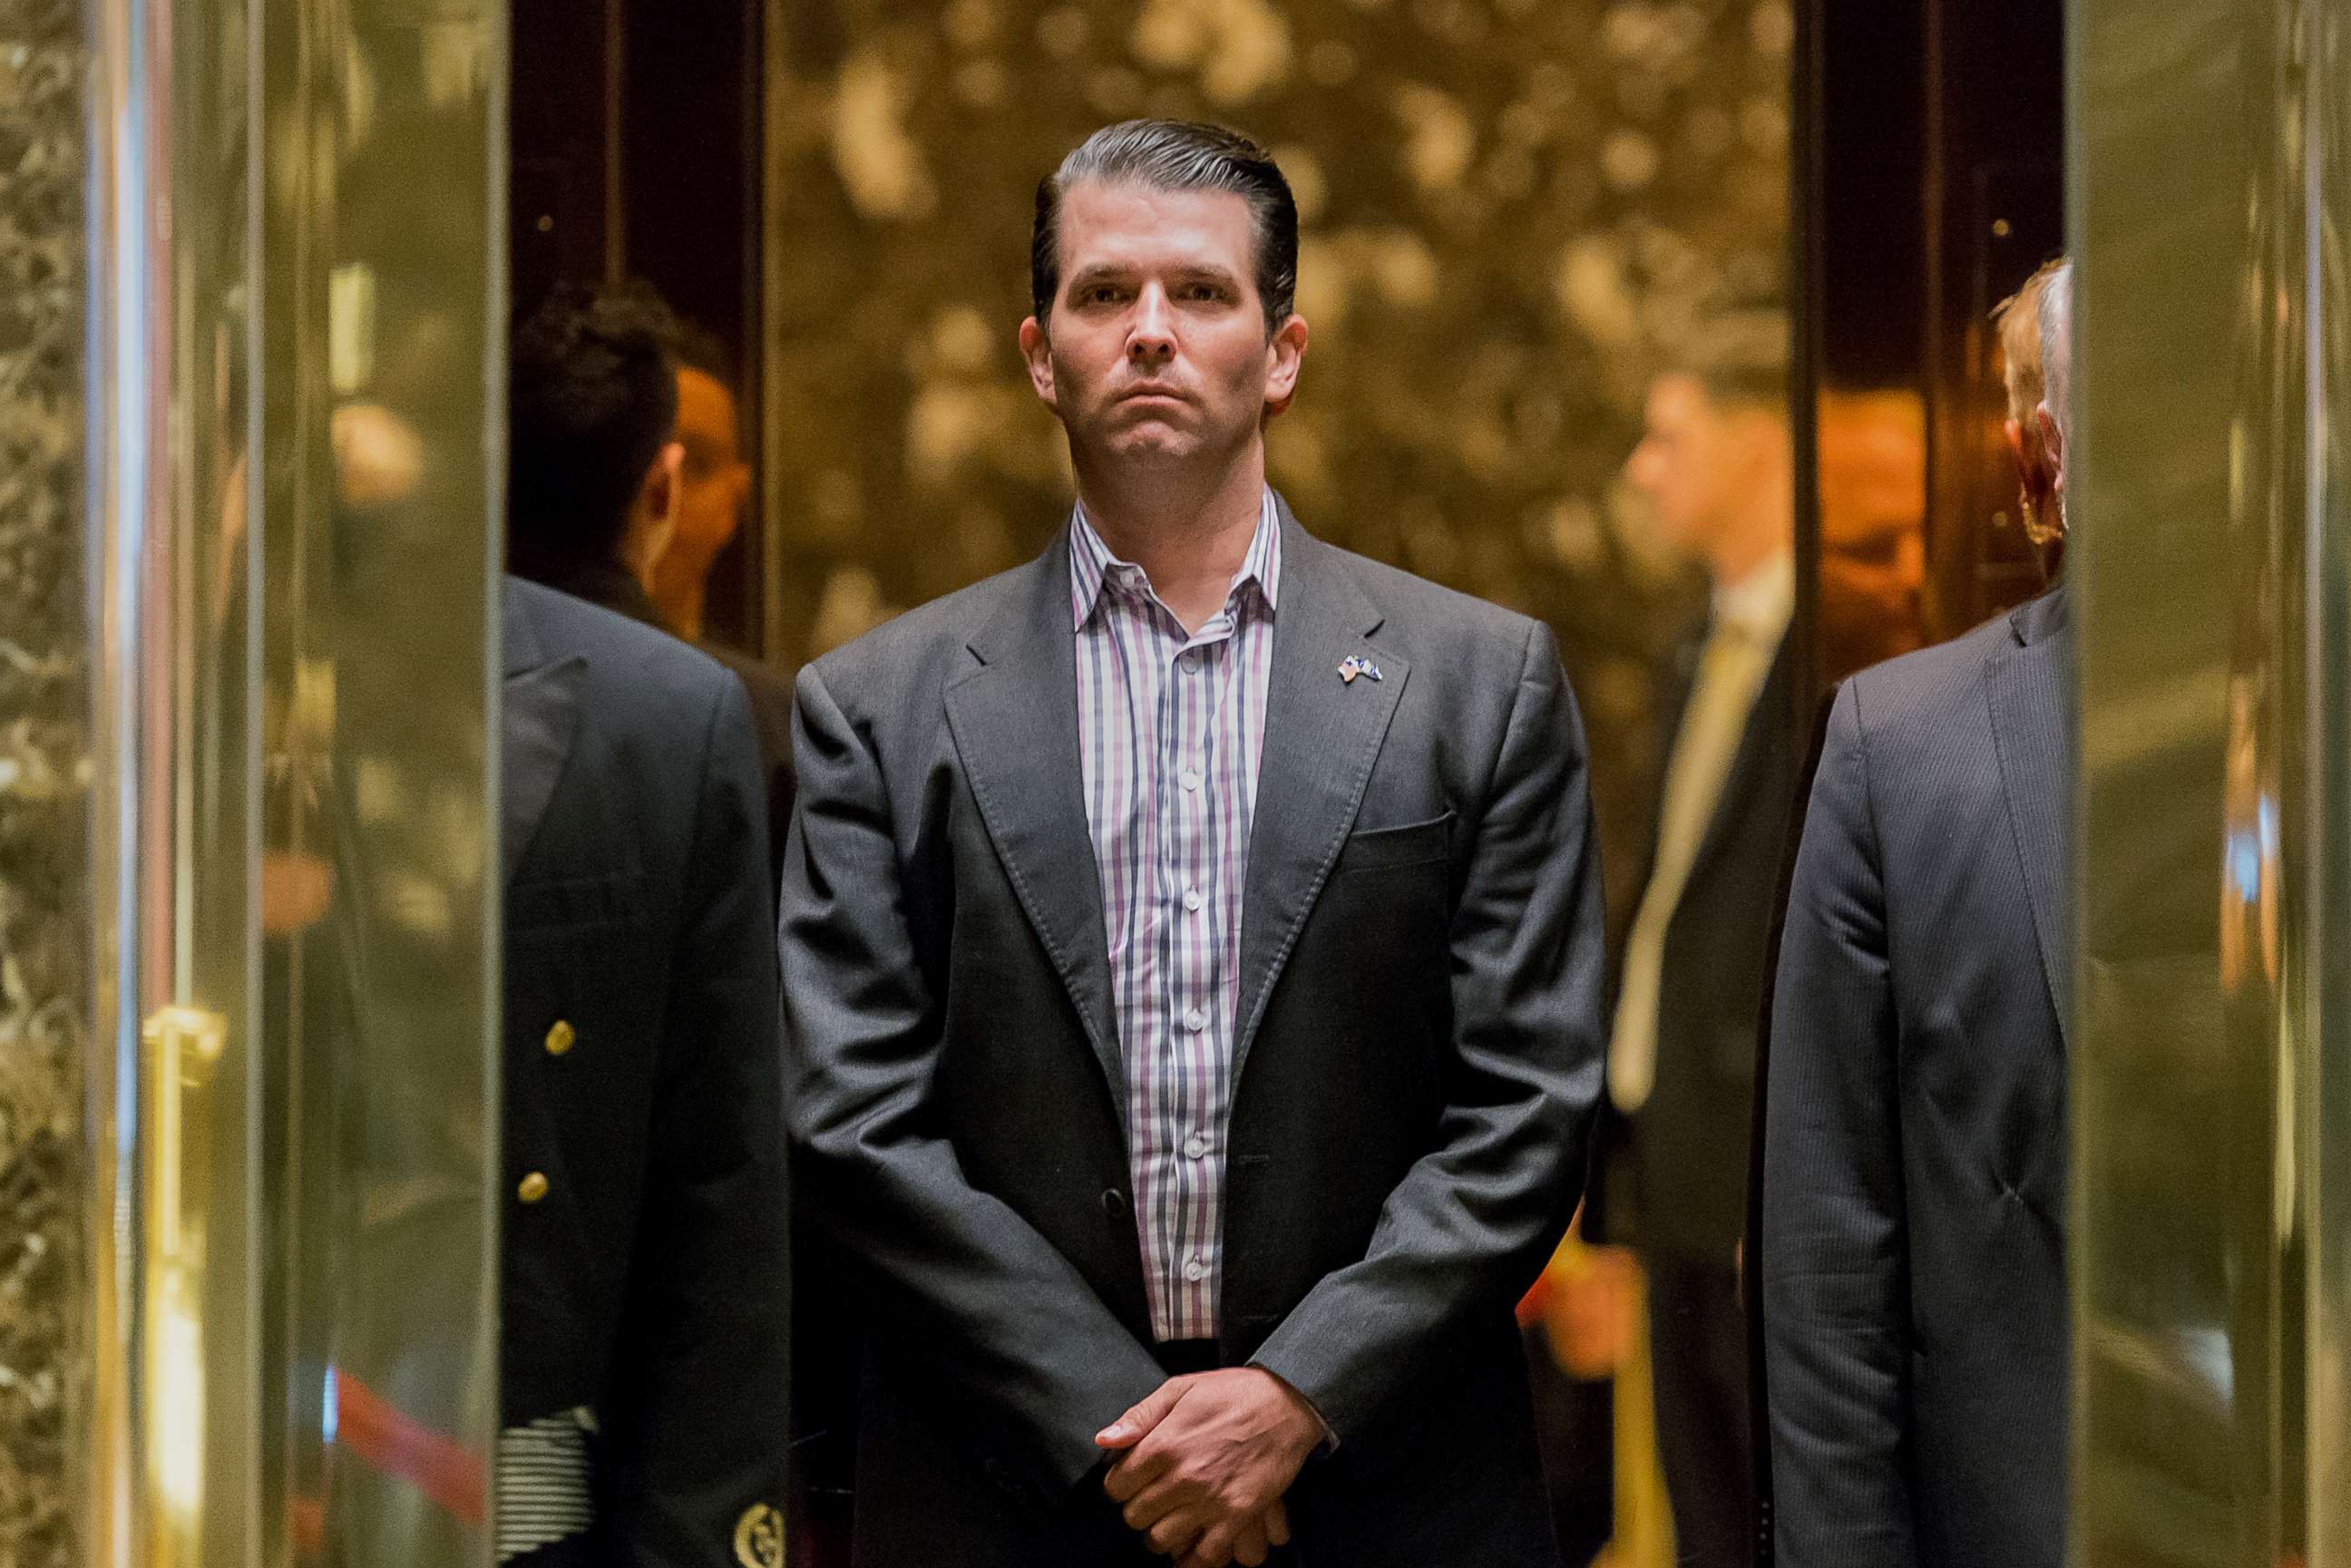 Donald Trump Jr., stands in an elevator at Trump Tower in New York, Jan. 18, 2017.  